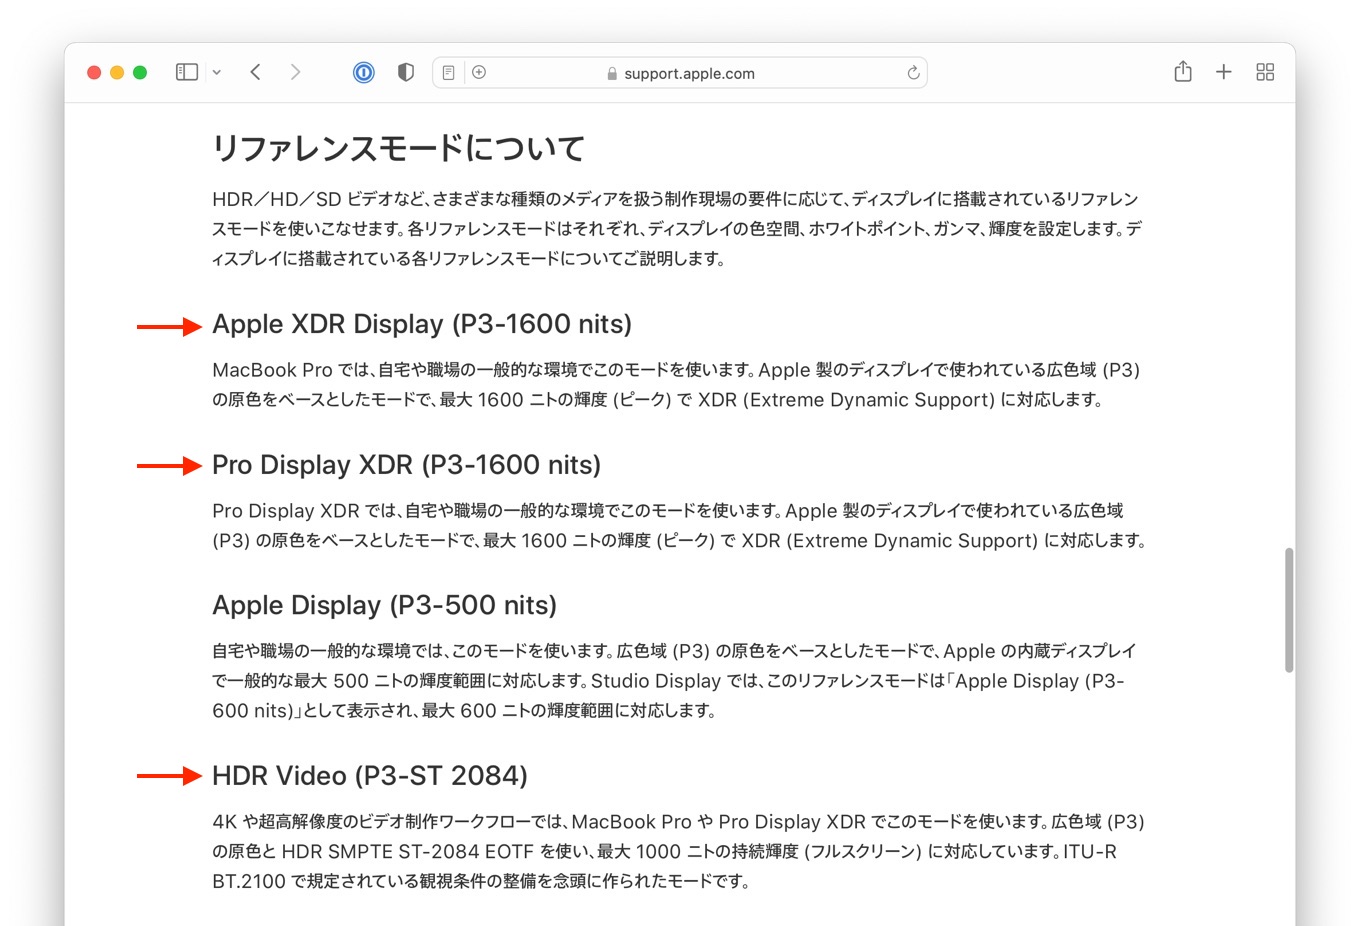 Apple XDR Display extended brightness modes 100nits